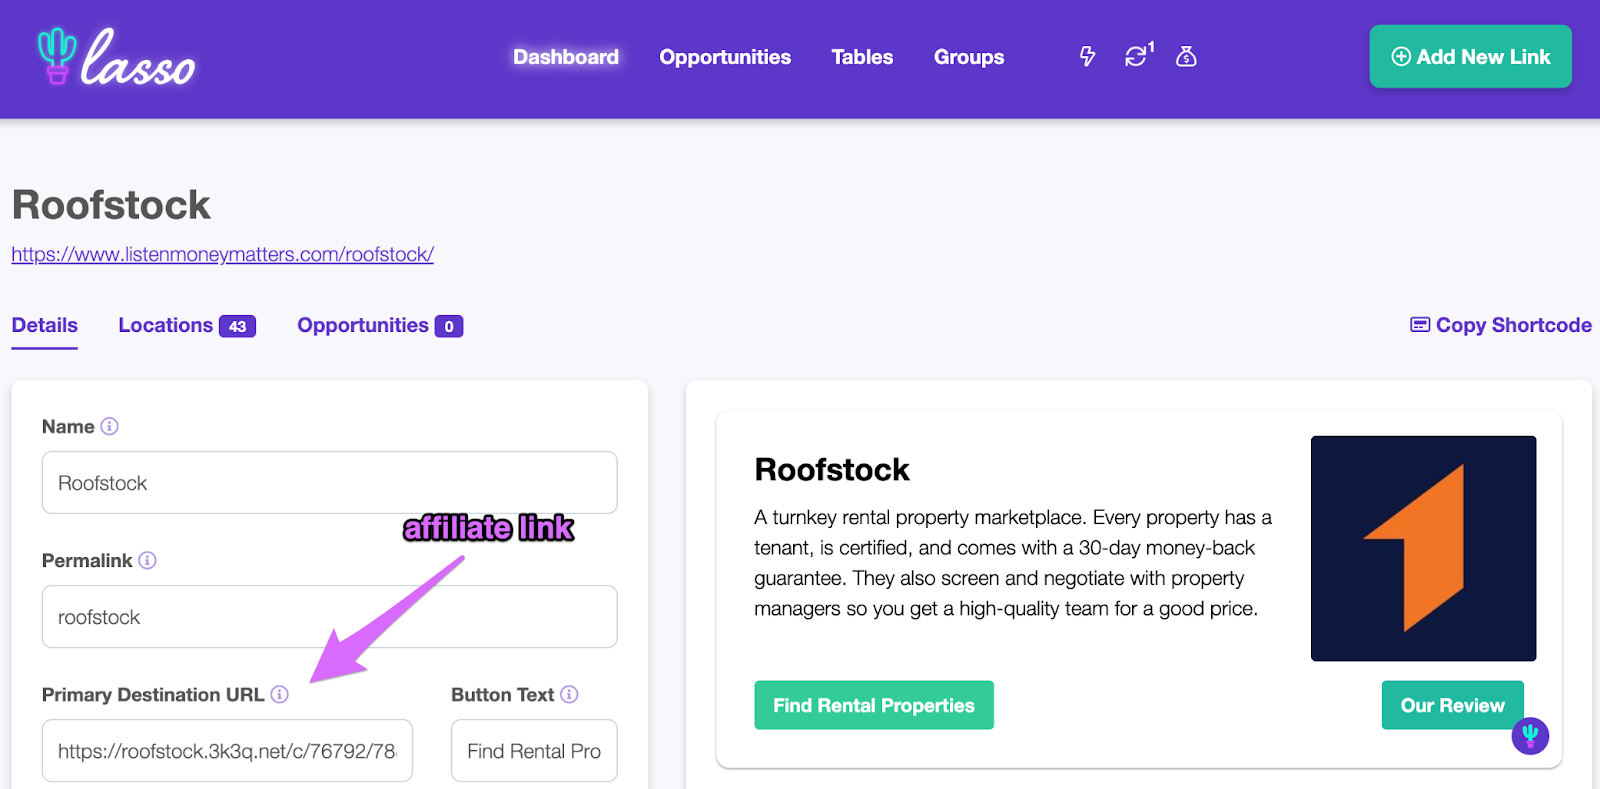 Link details page for roofstock affiliate on listen money matters 